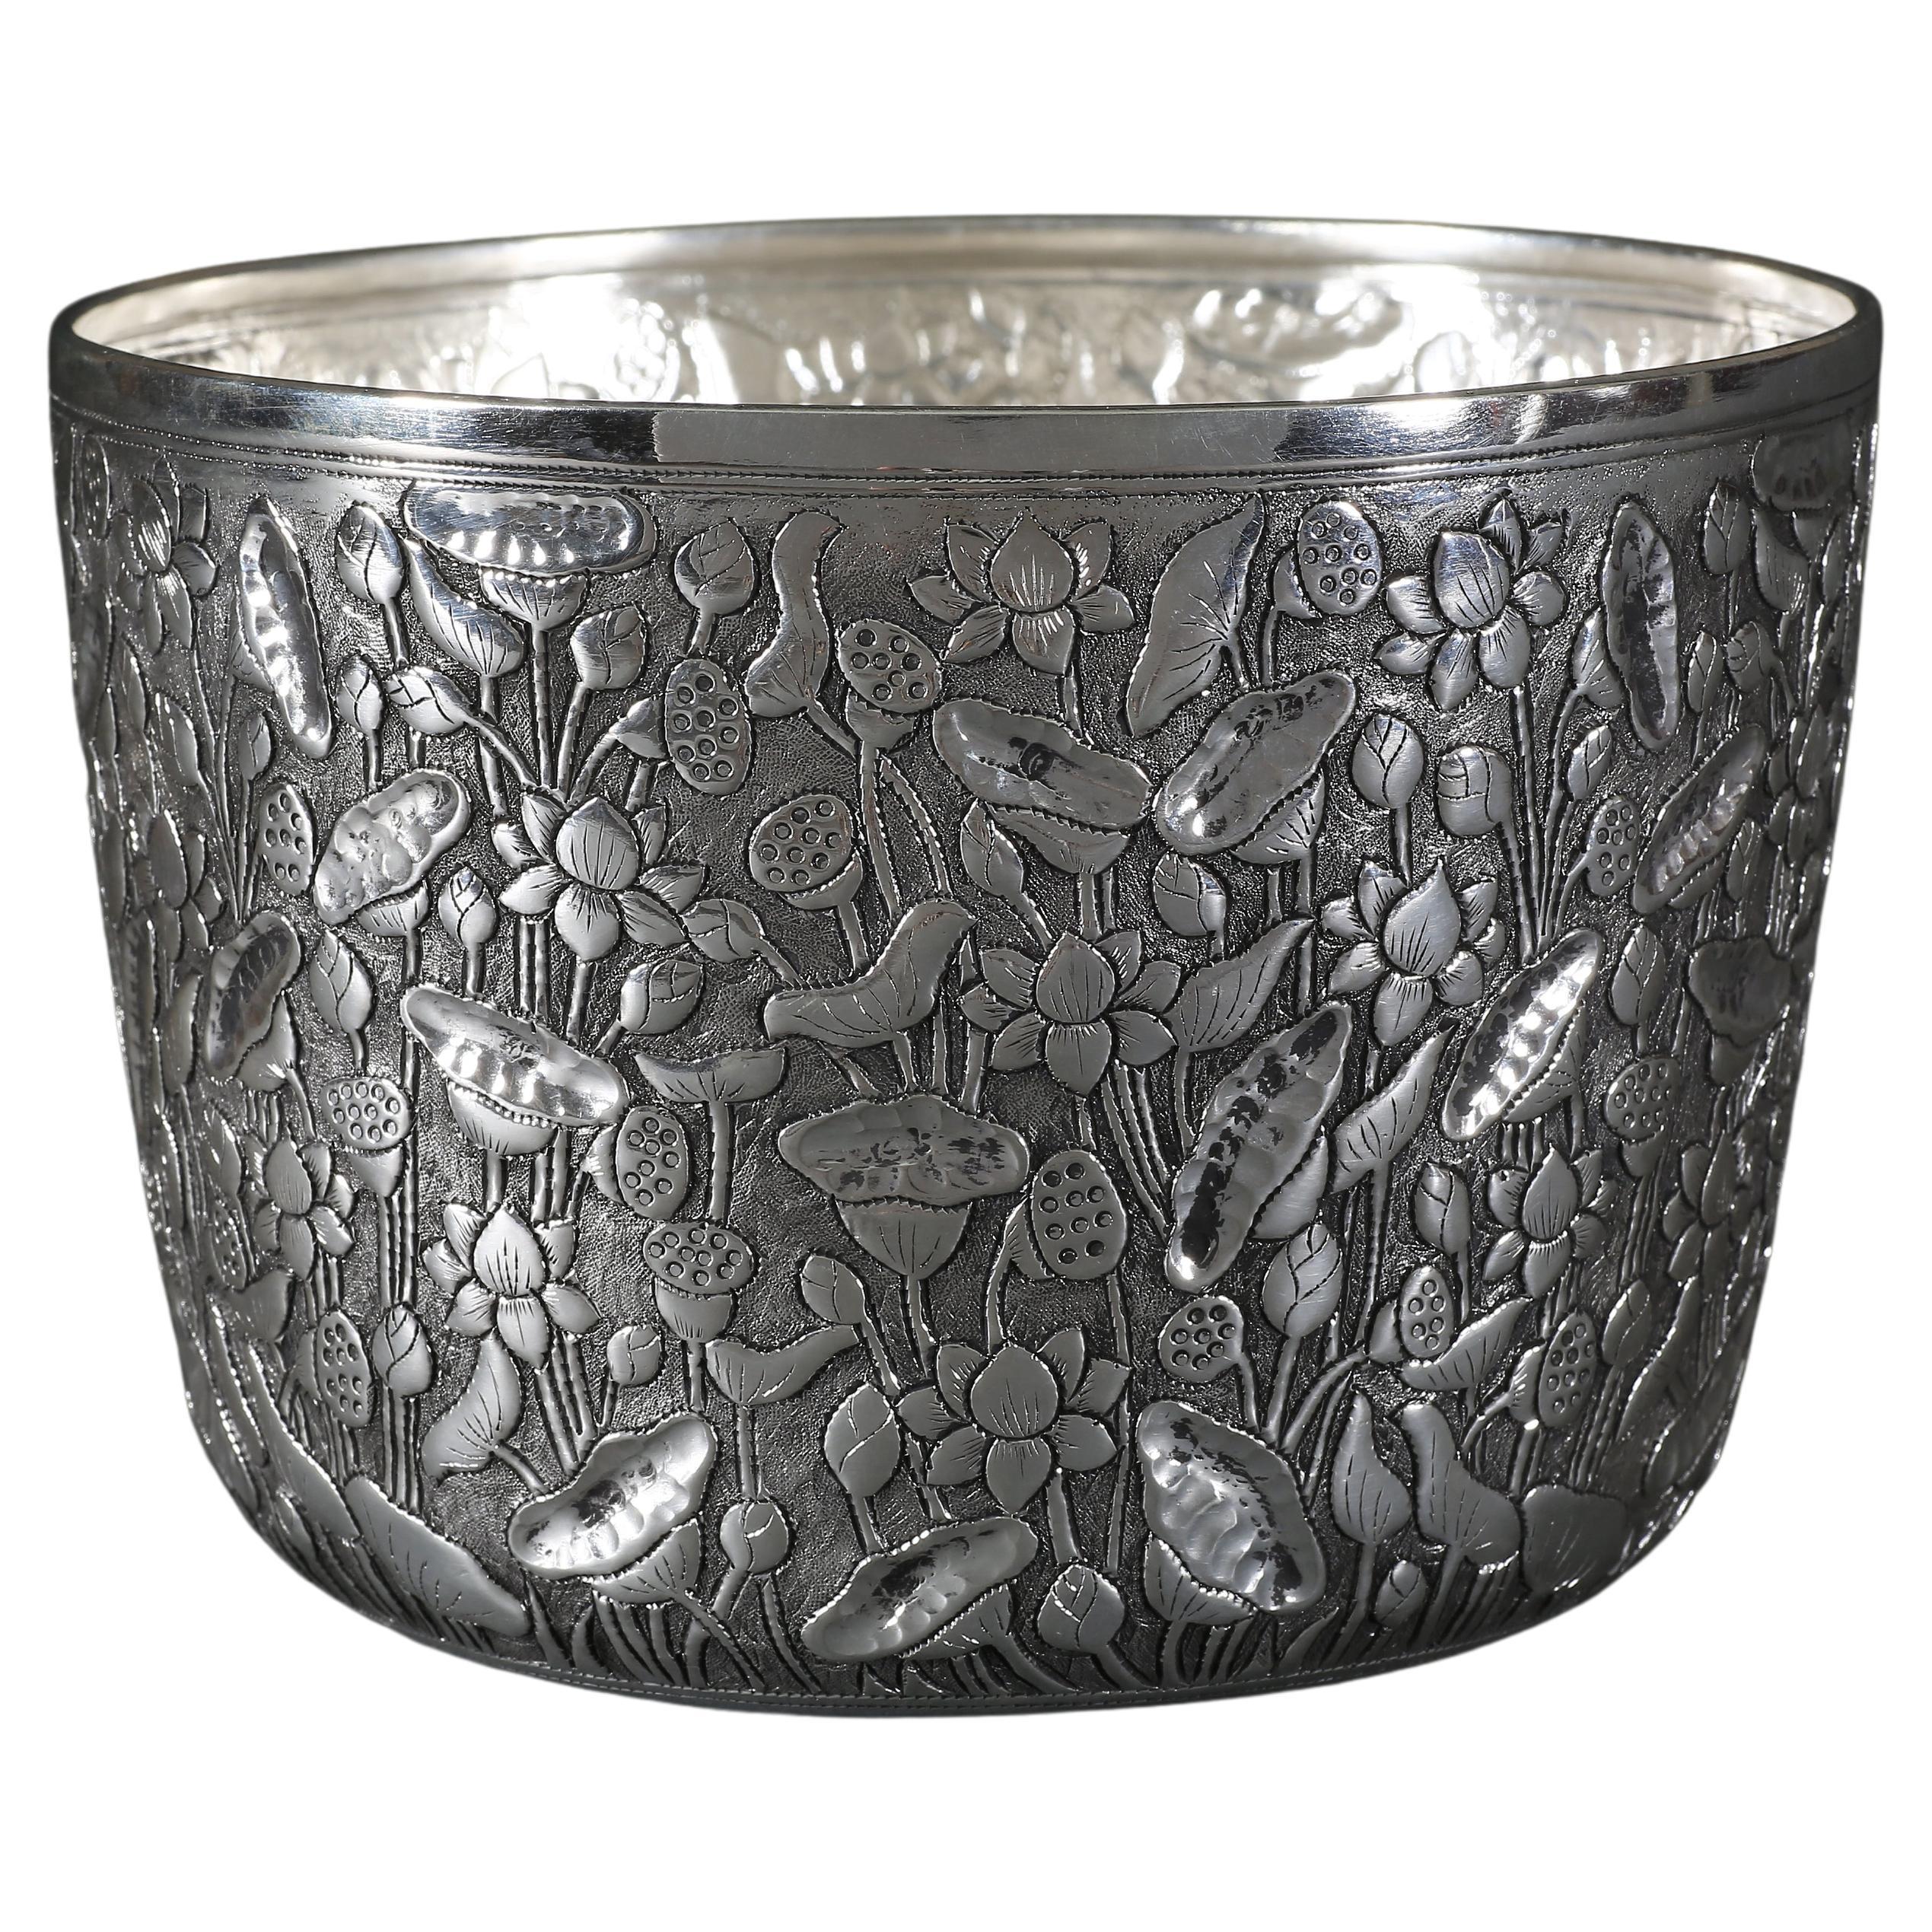 Hand-Worked Solid Silver Bowl, Hand-Chased Lotus Pond, Chinoiserie Centerpiece